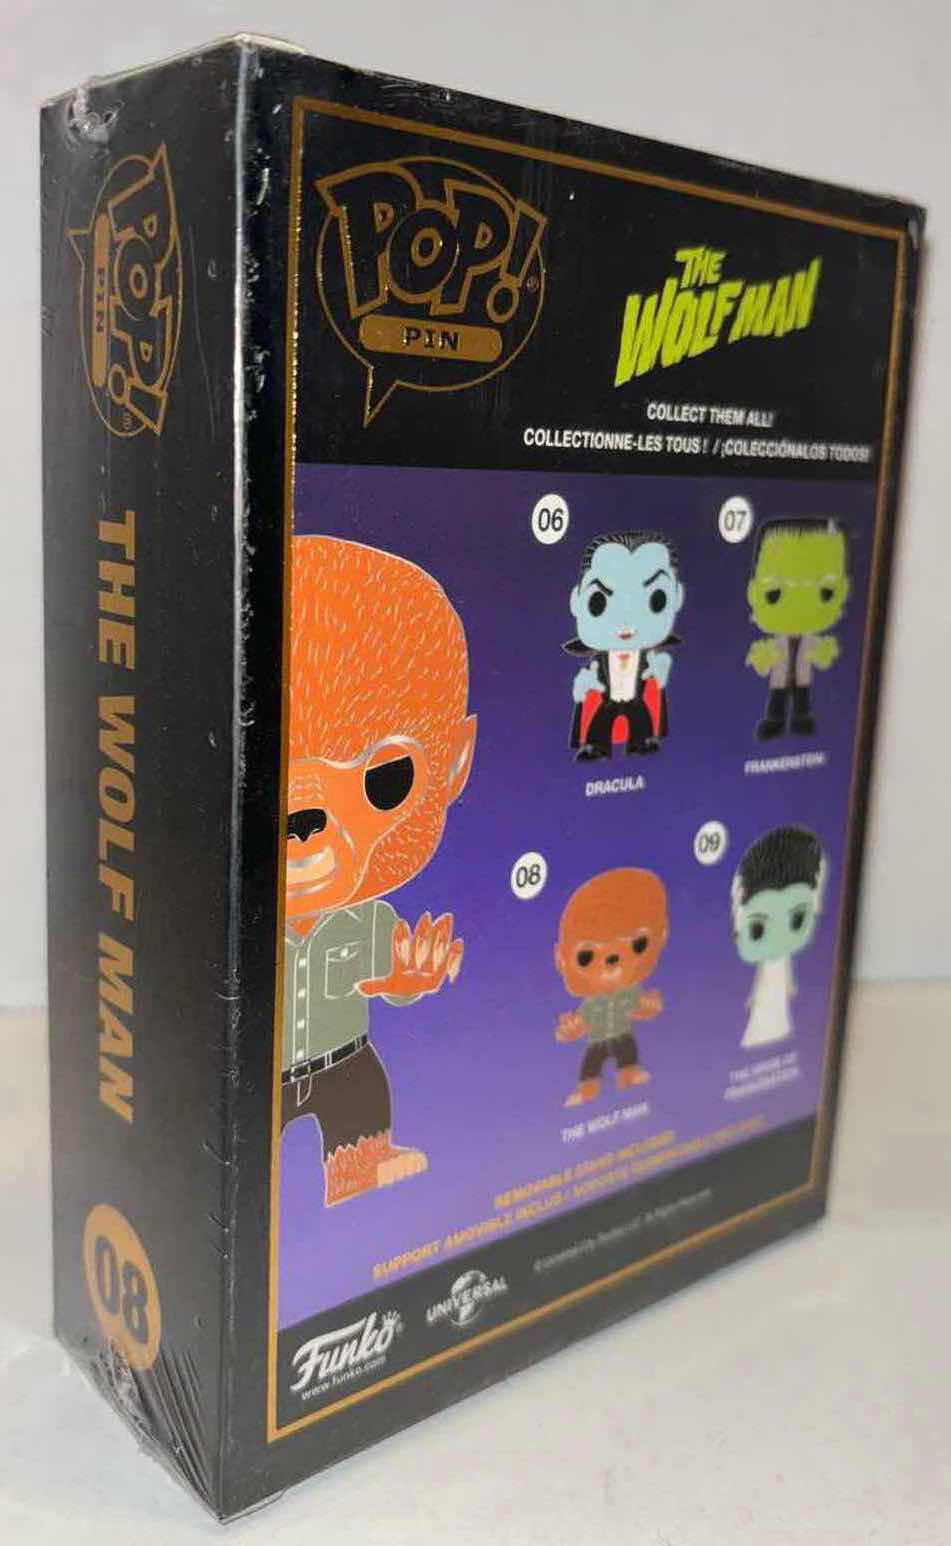 Photo 2 of NEW FUNKO POP! PIN, UNIVERSAL MONSTERS HORROR #08 THE WOLF MAN ENAMEL PIN